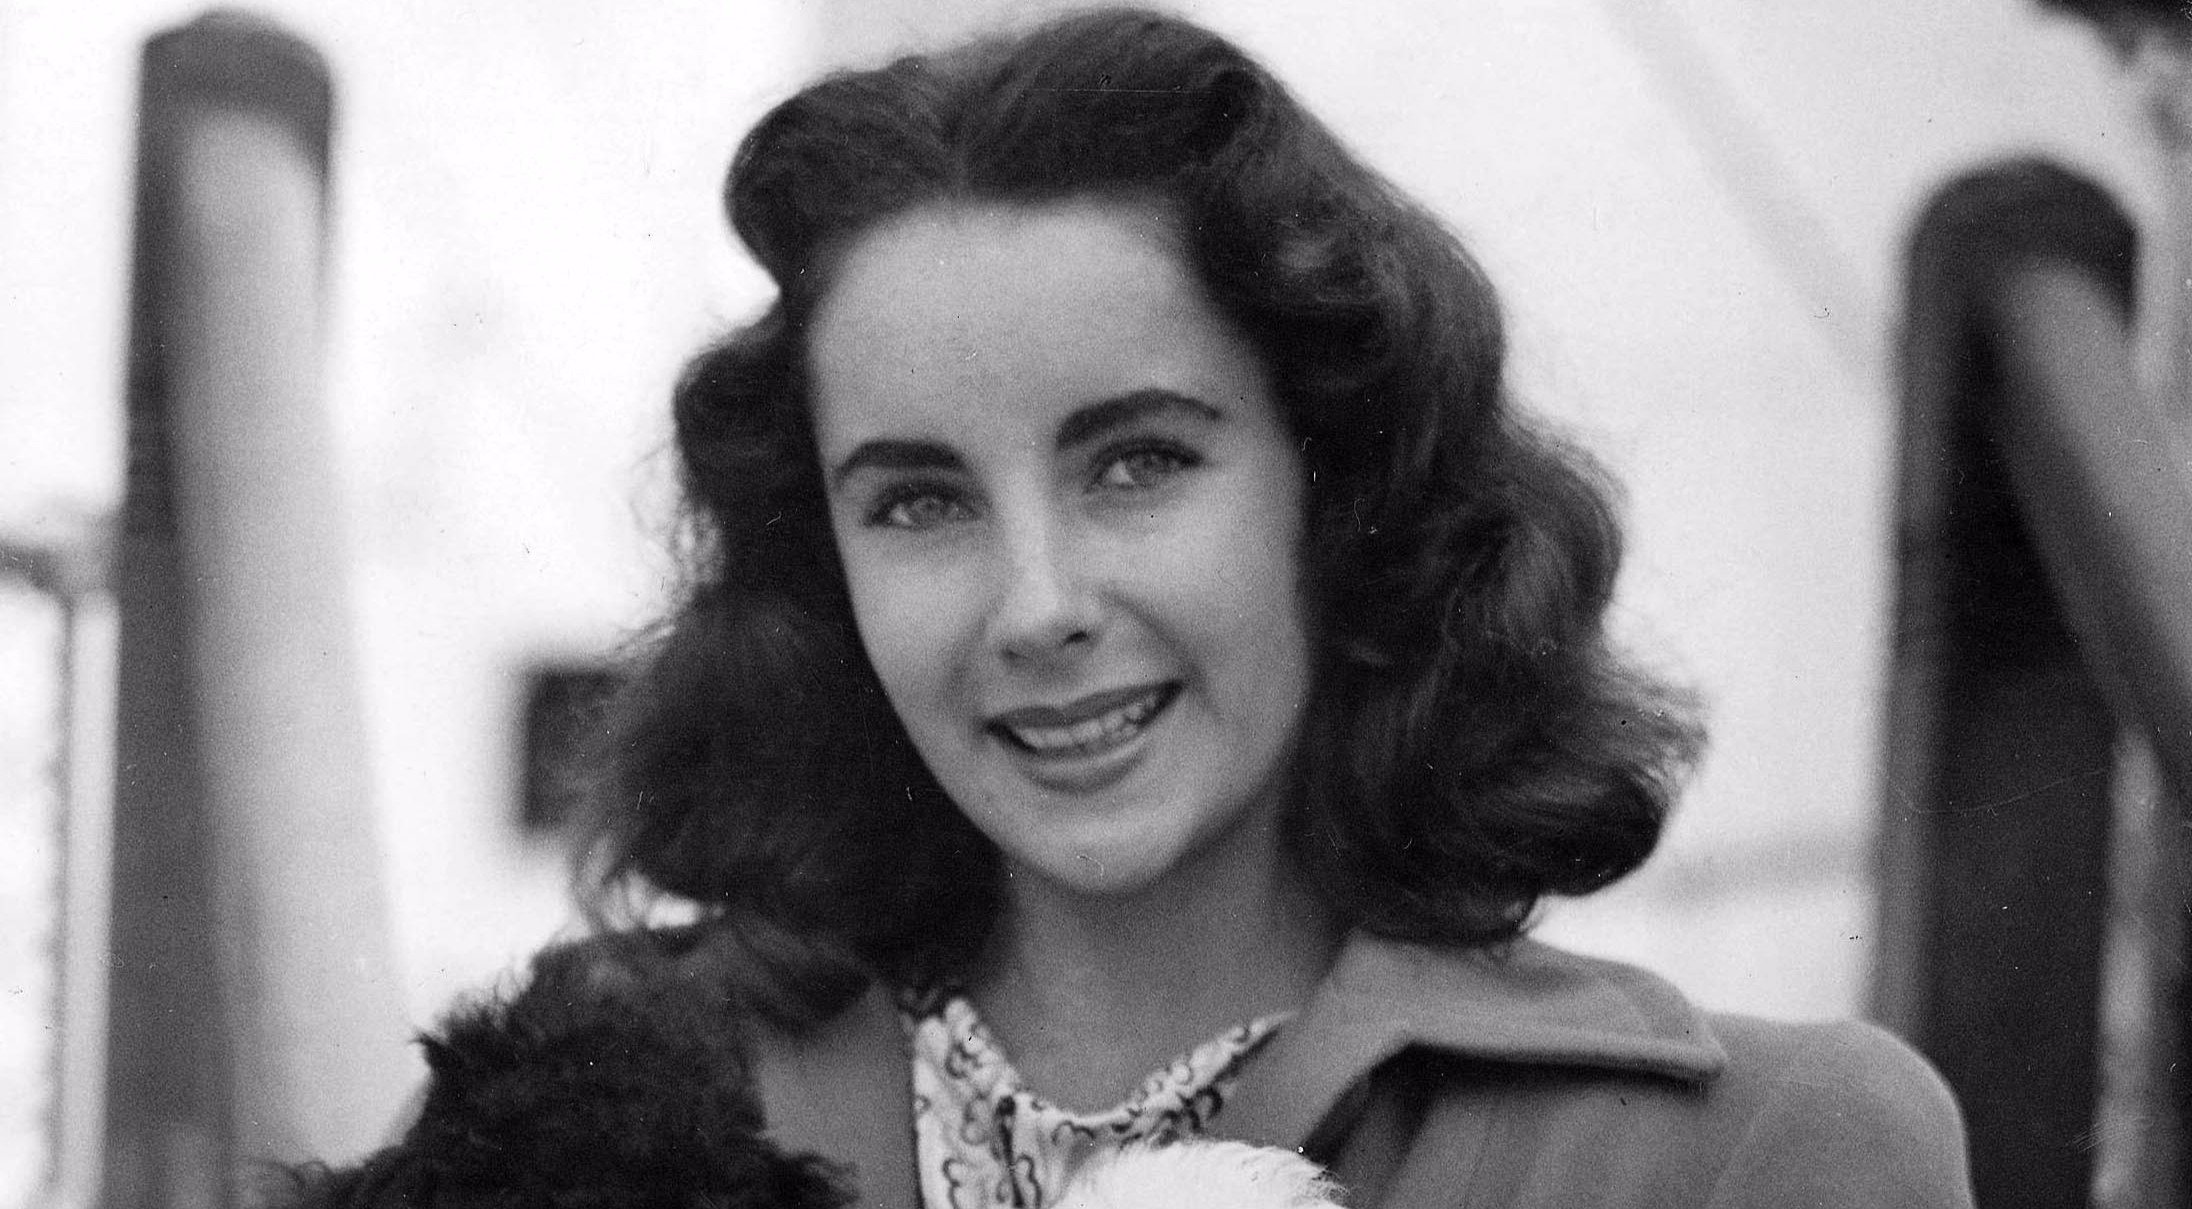 Elizabeth Taylor Cause of Death: Long term health issues